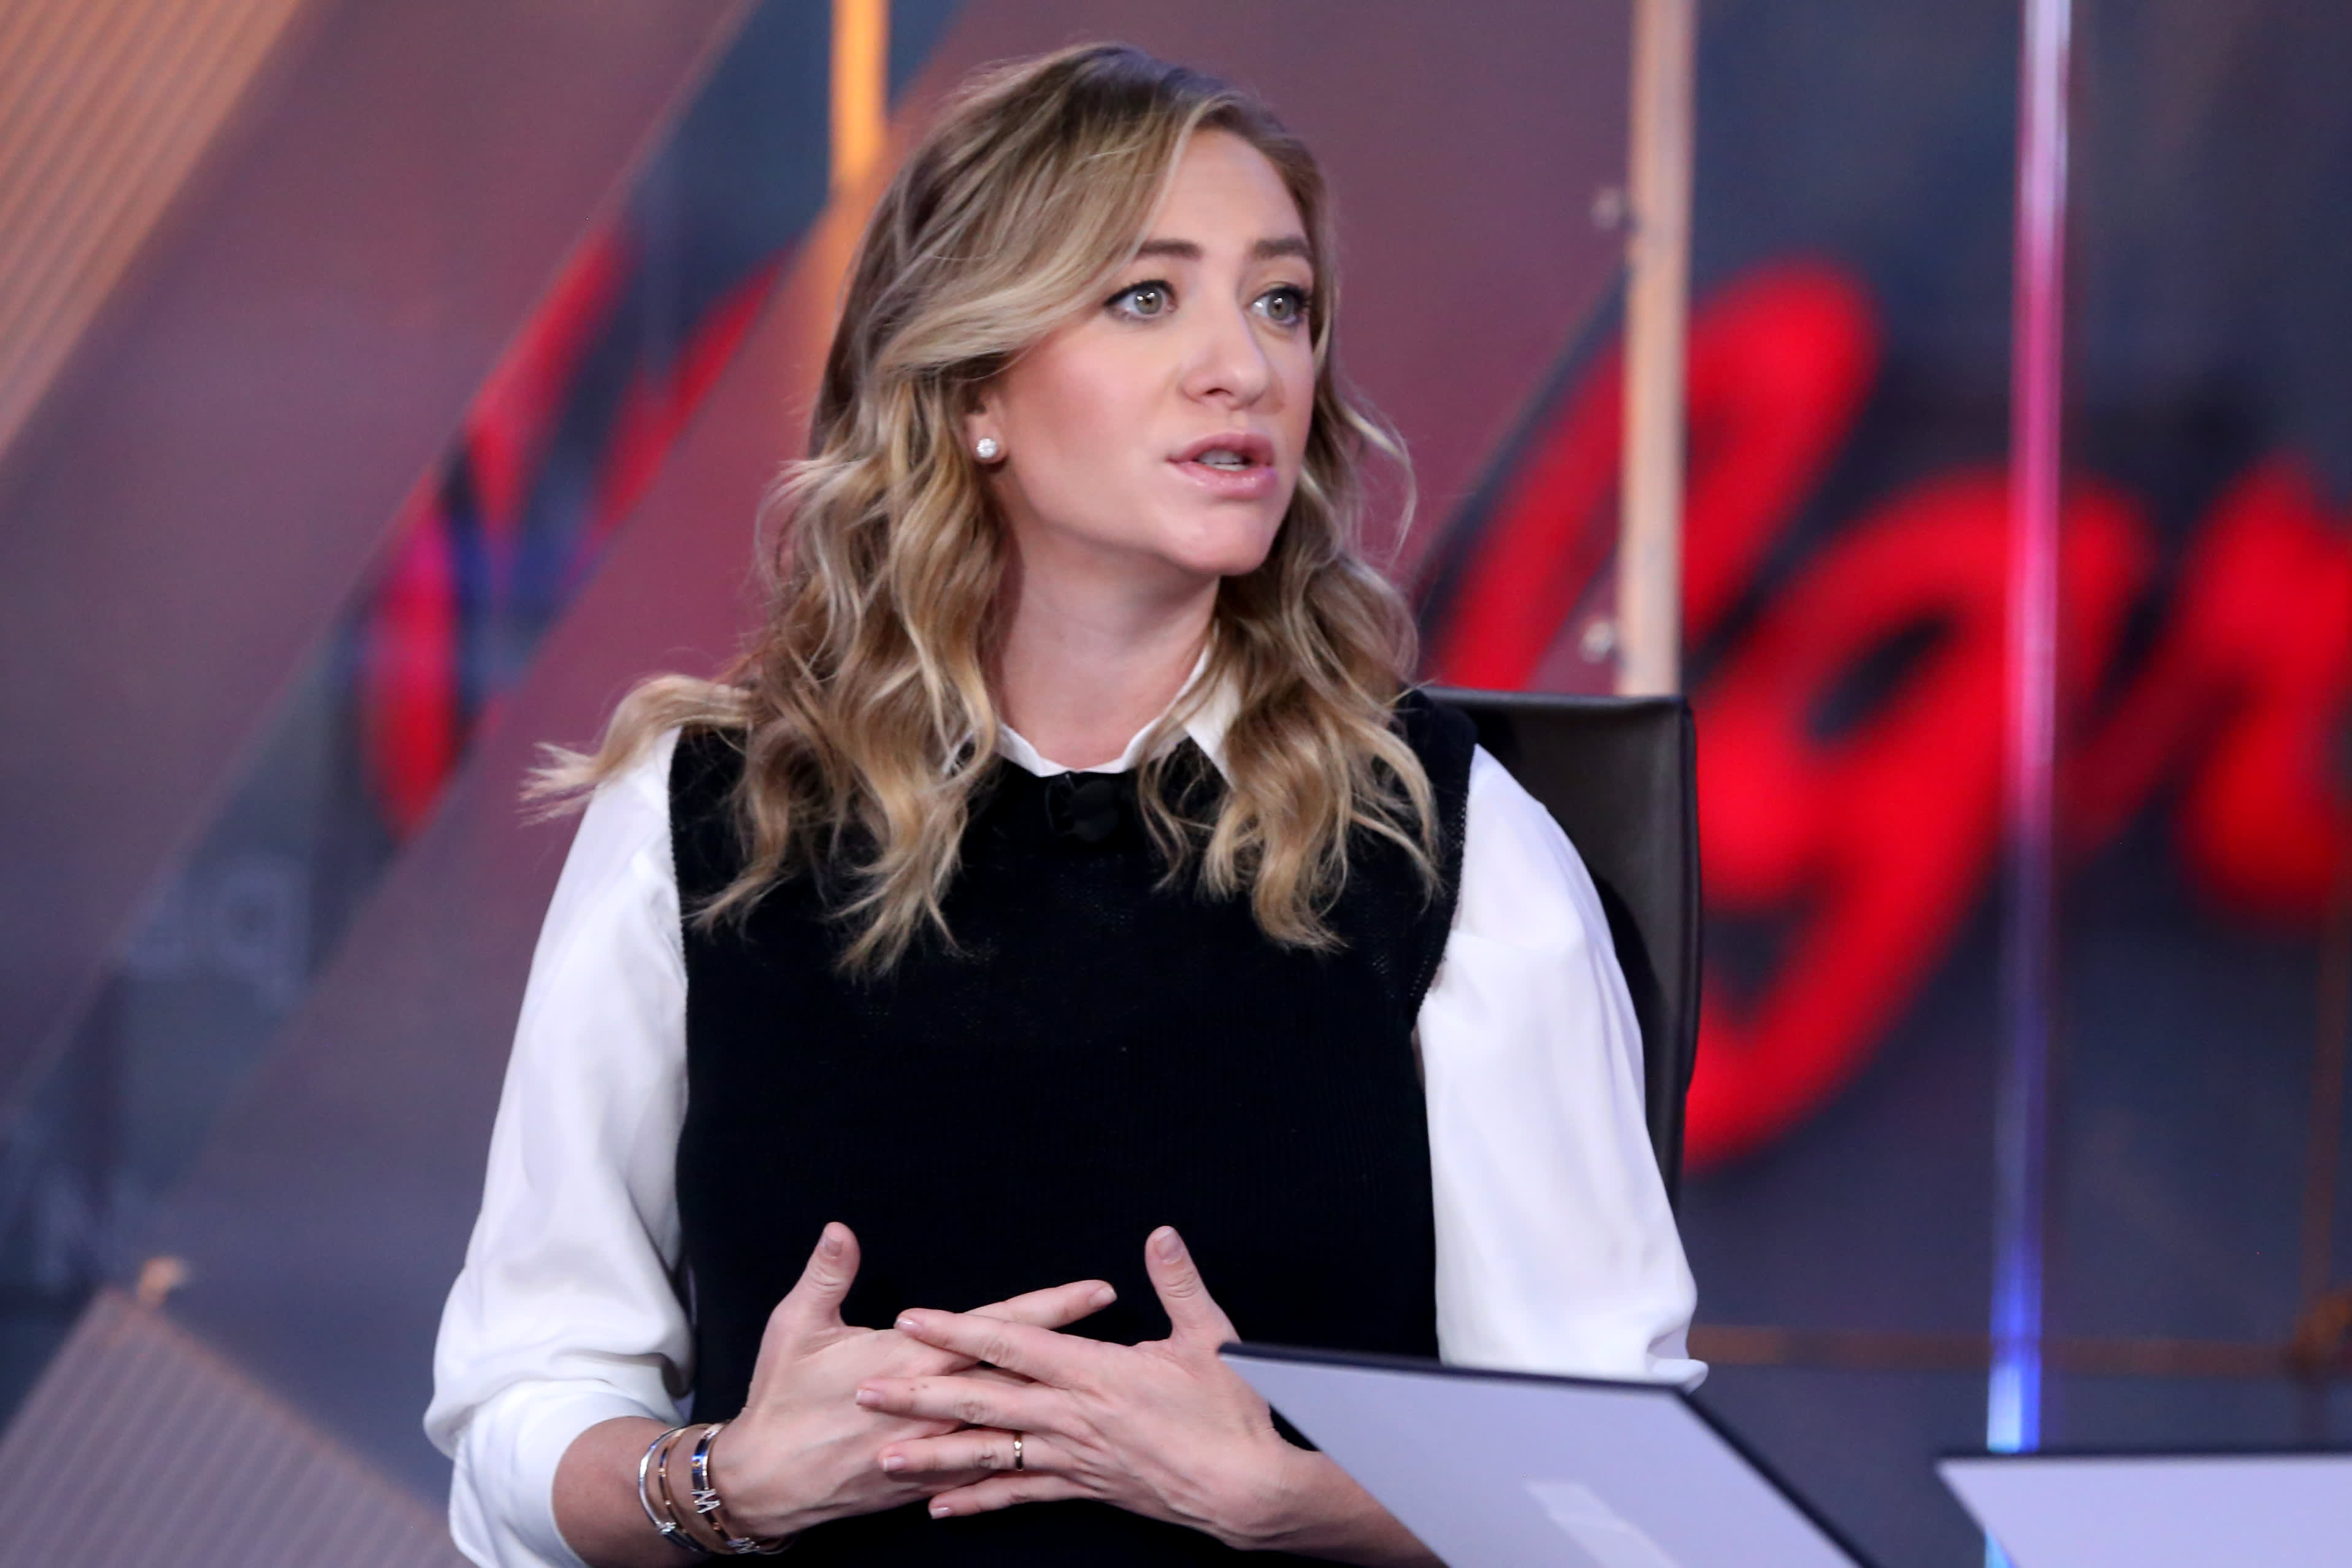 Bumble CEO Whitney Wolfe Herd at a favorite quote from Jeff Bezos